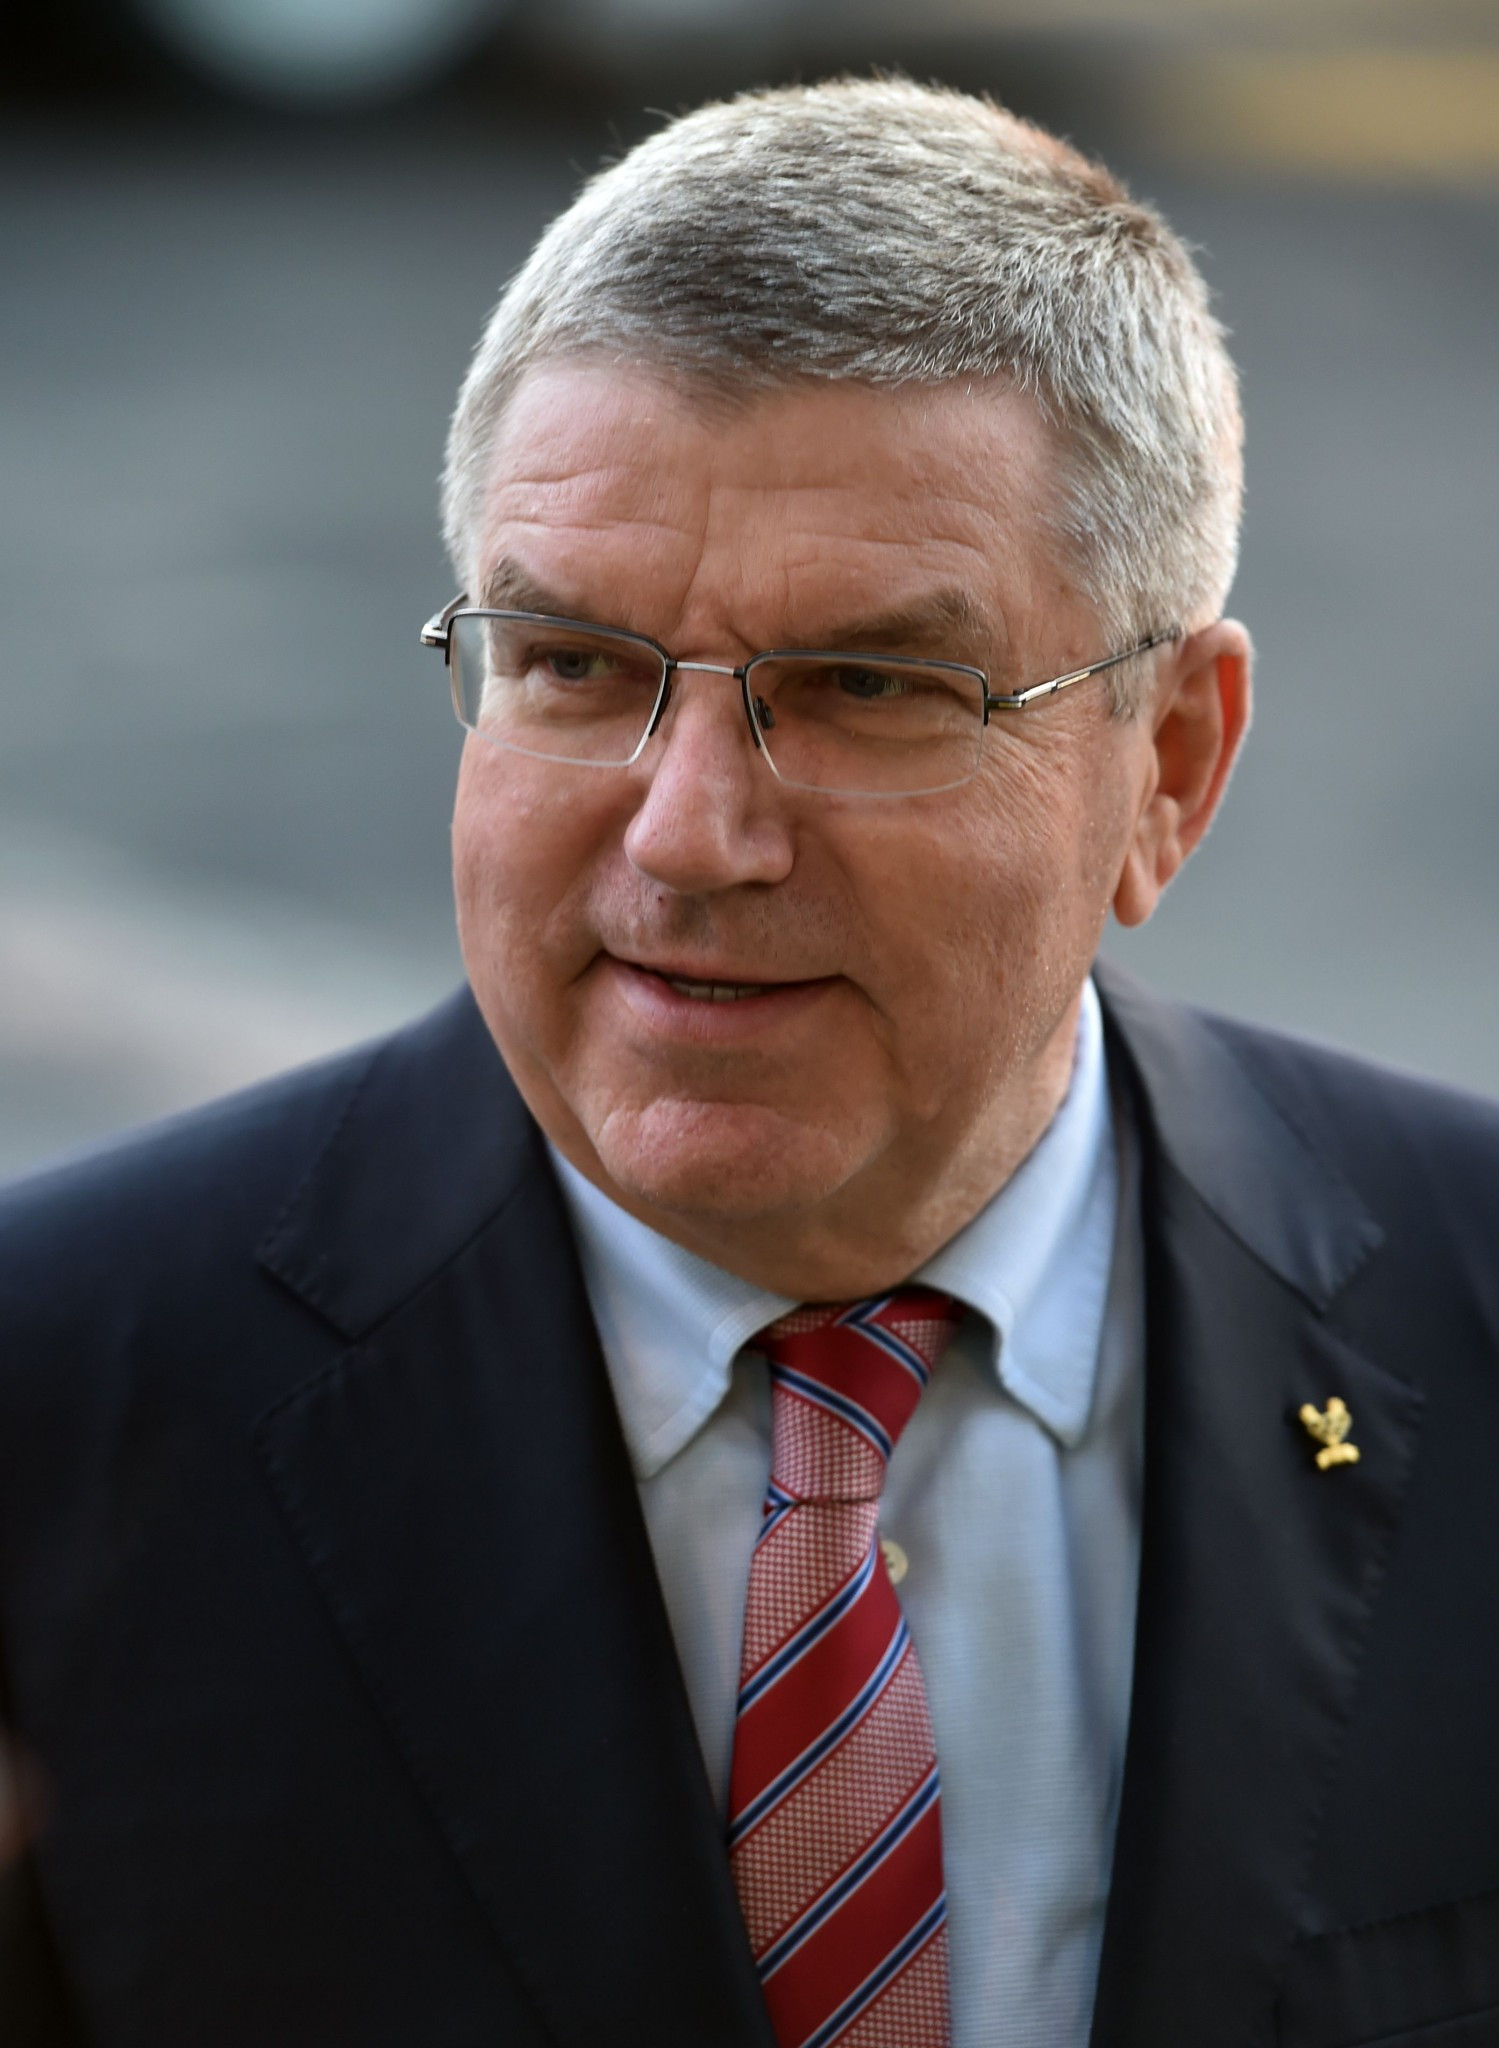 Thomas Bach served as an EB member before becoming President of the IOC ©Getty Images